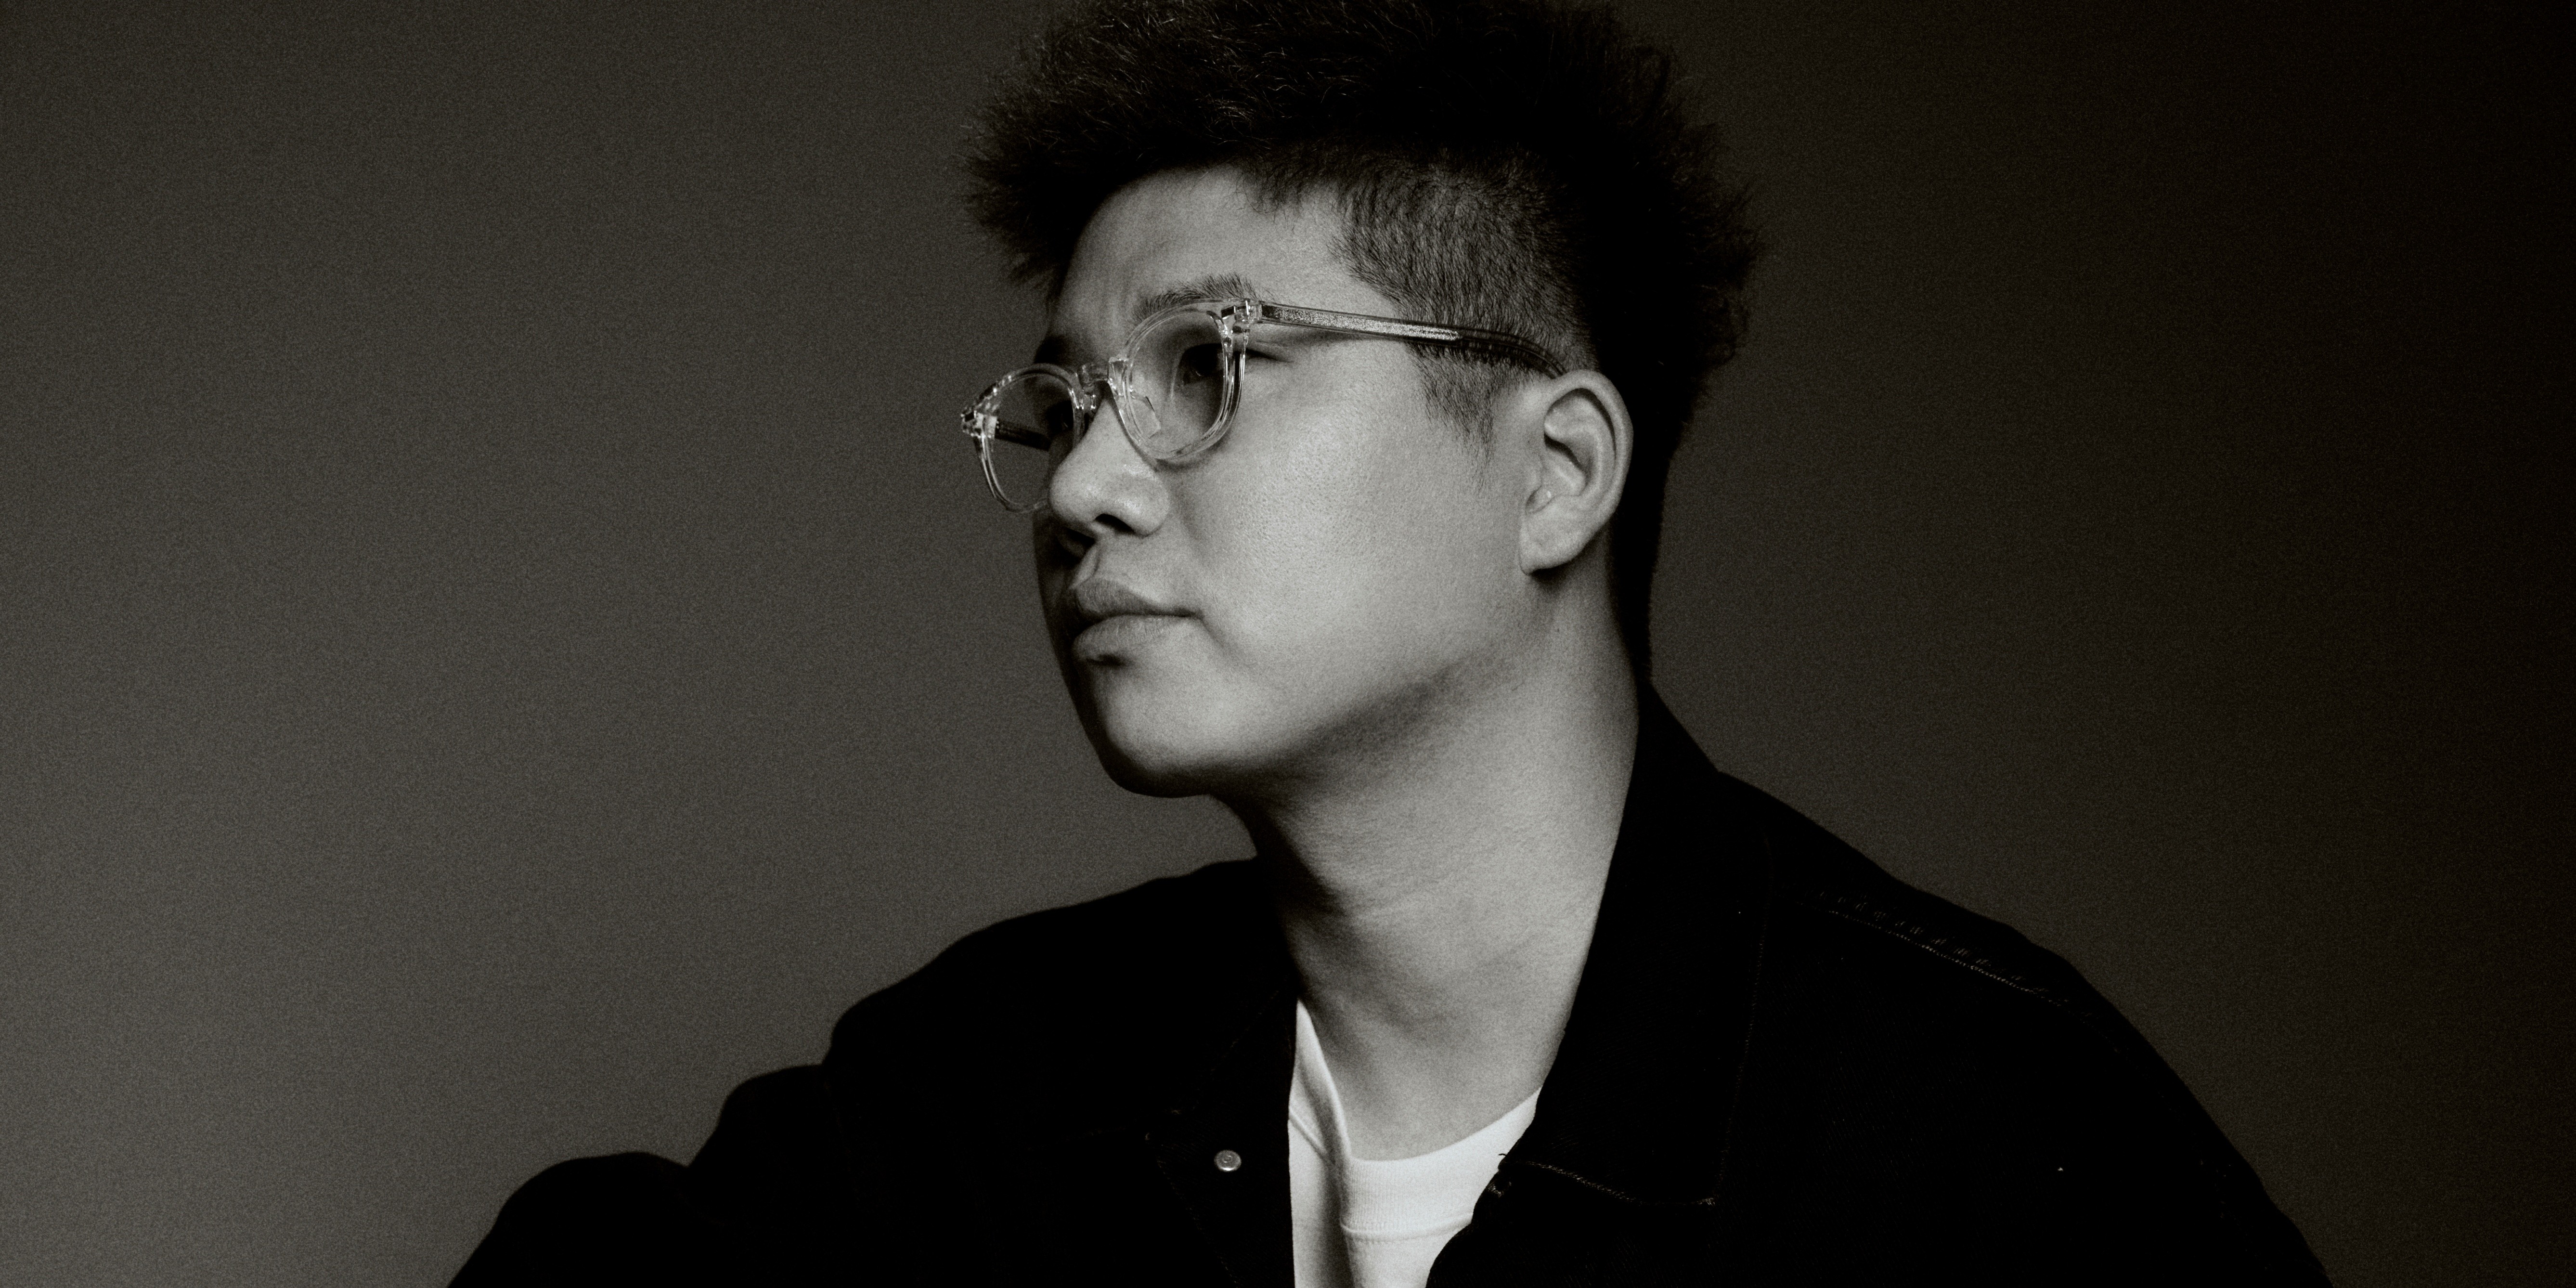 Guitarist and producer Soowan Chung on touring with BTS, working on K-pop tunes and K-drama OSTs, and recording over 6,000 songs